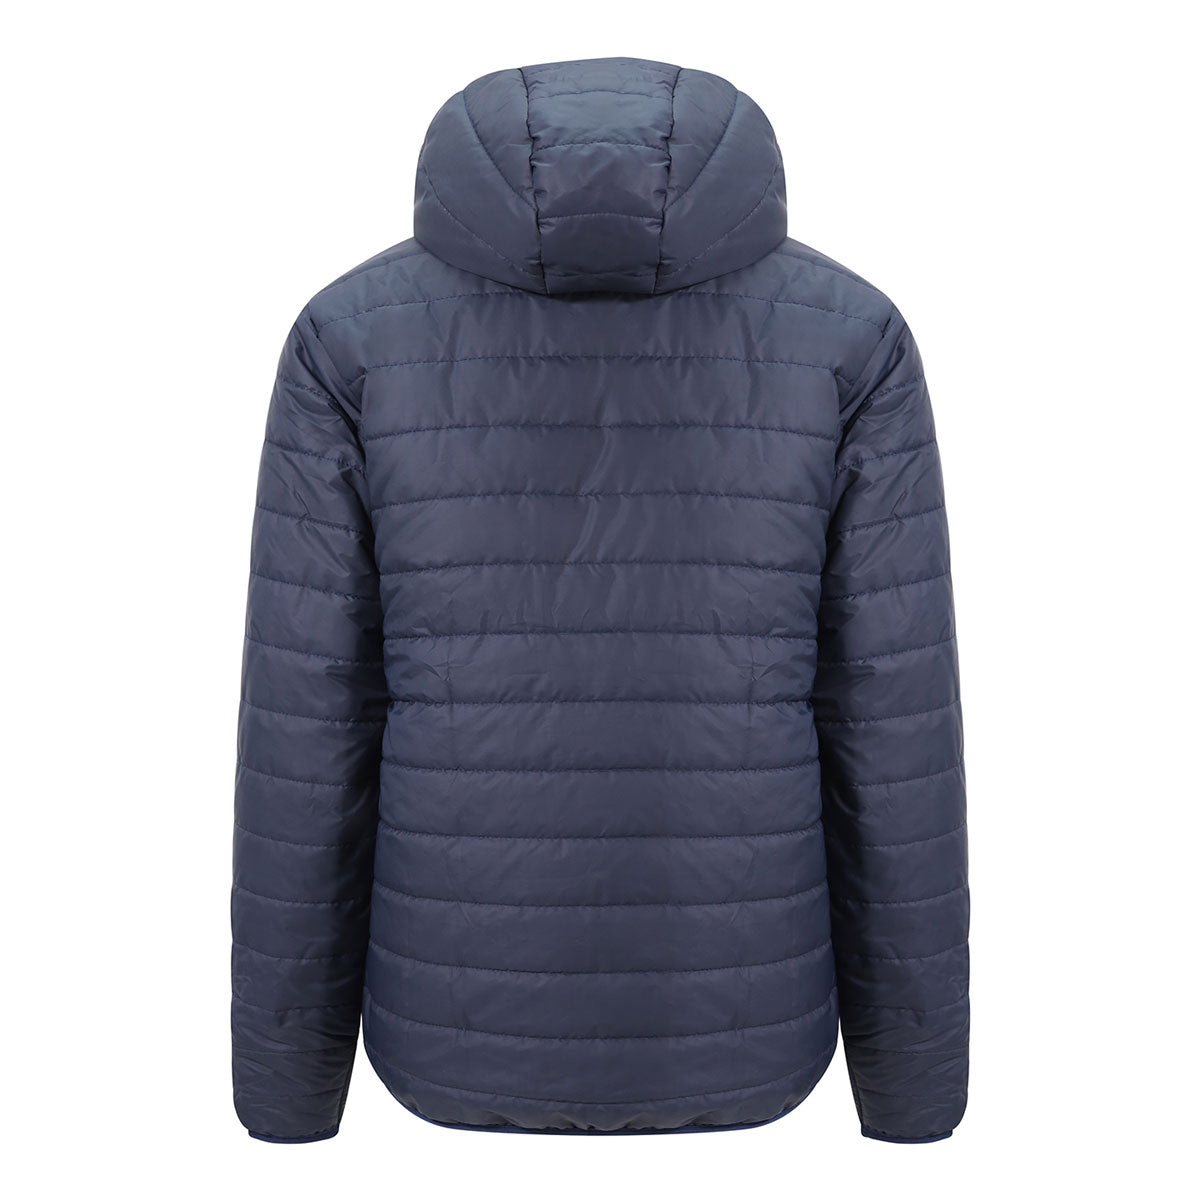 Mc Keever CLG Ghaoth Dobhair Core 22 Puffa Jacket - Youth - Navy